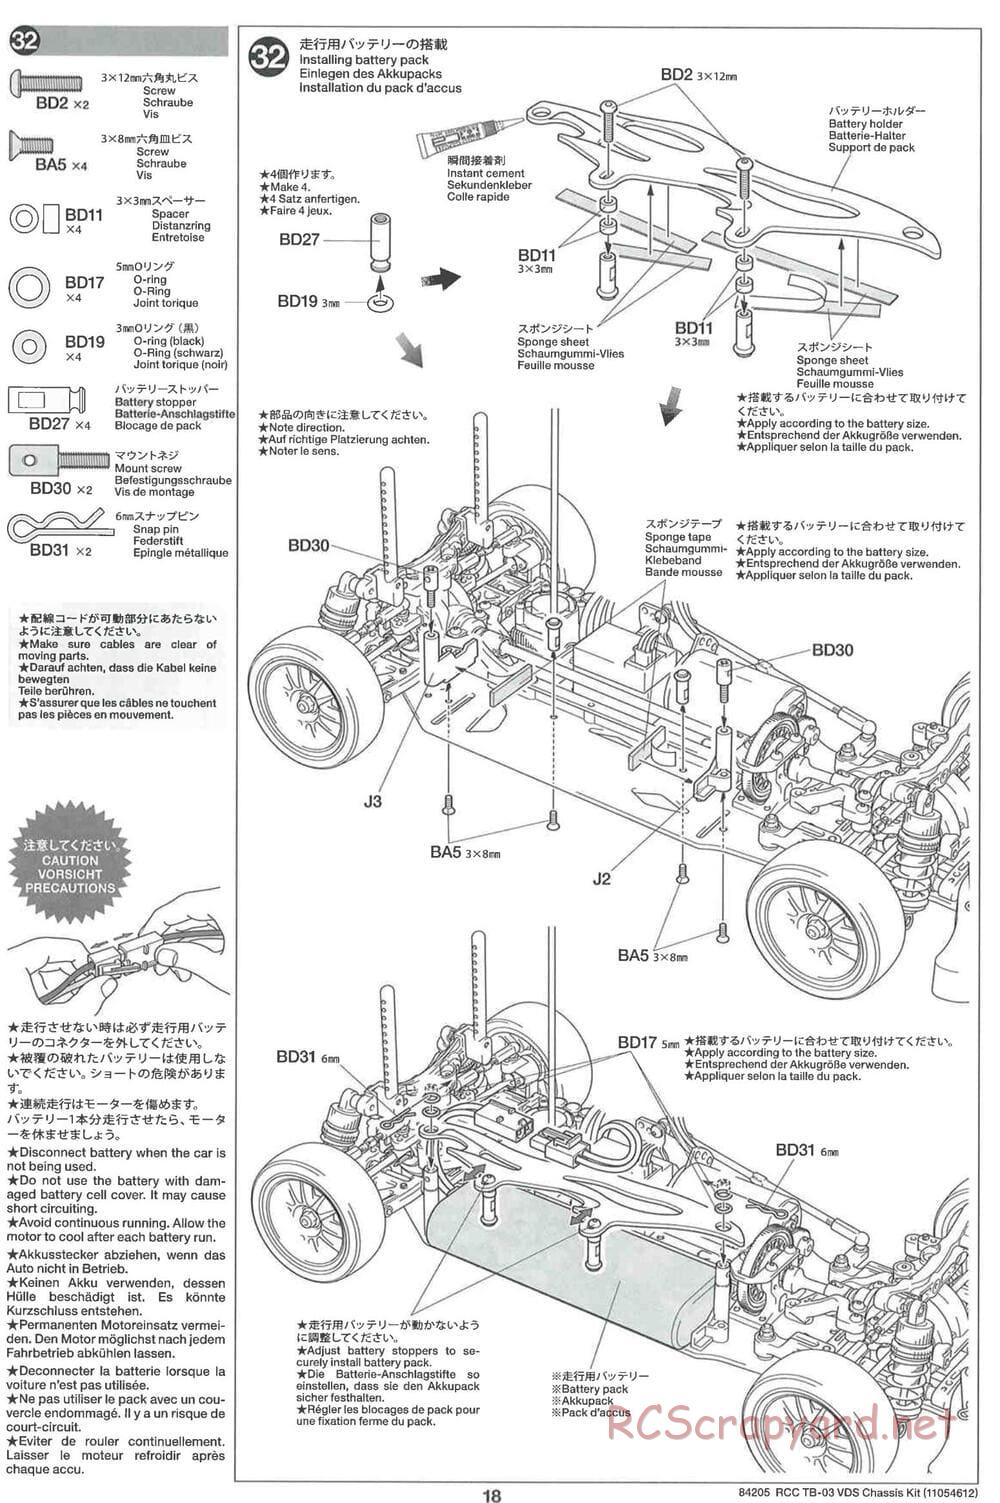 Tamiya - TB-03 VDS Drift Spec Chassis - Manual - Page 18